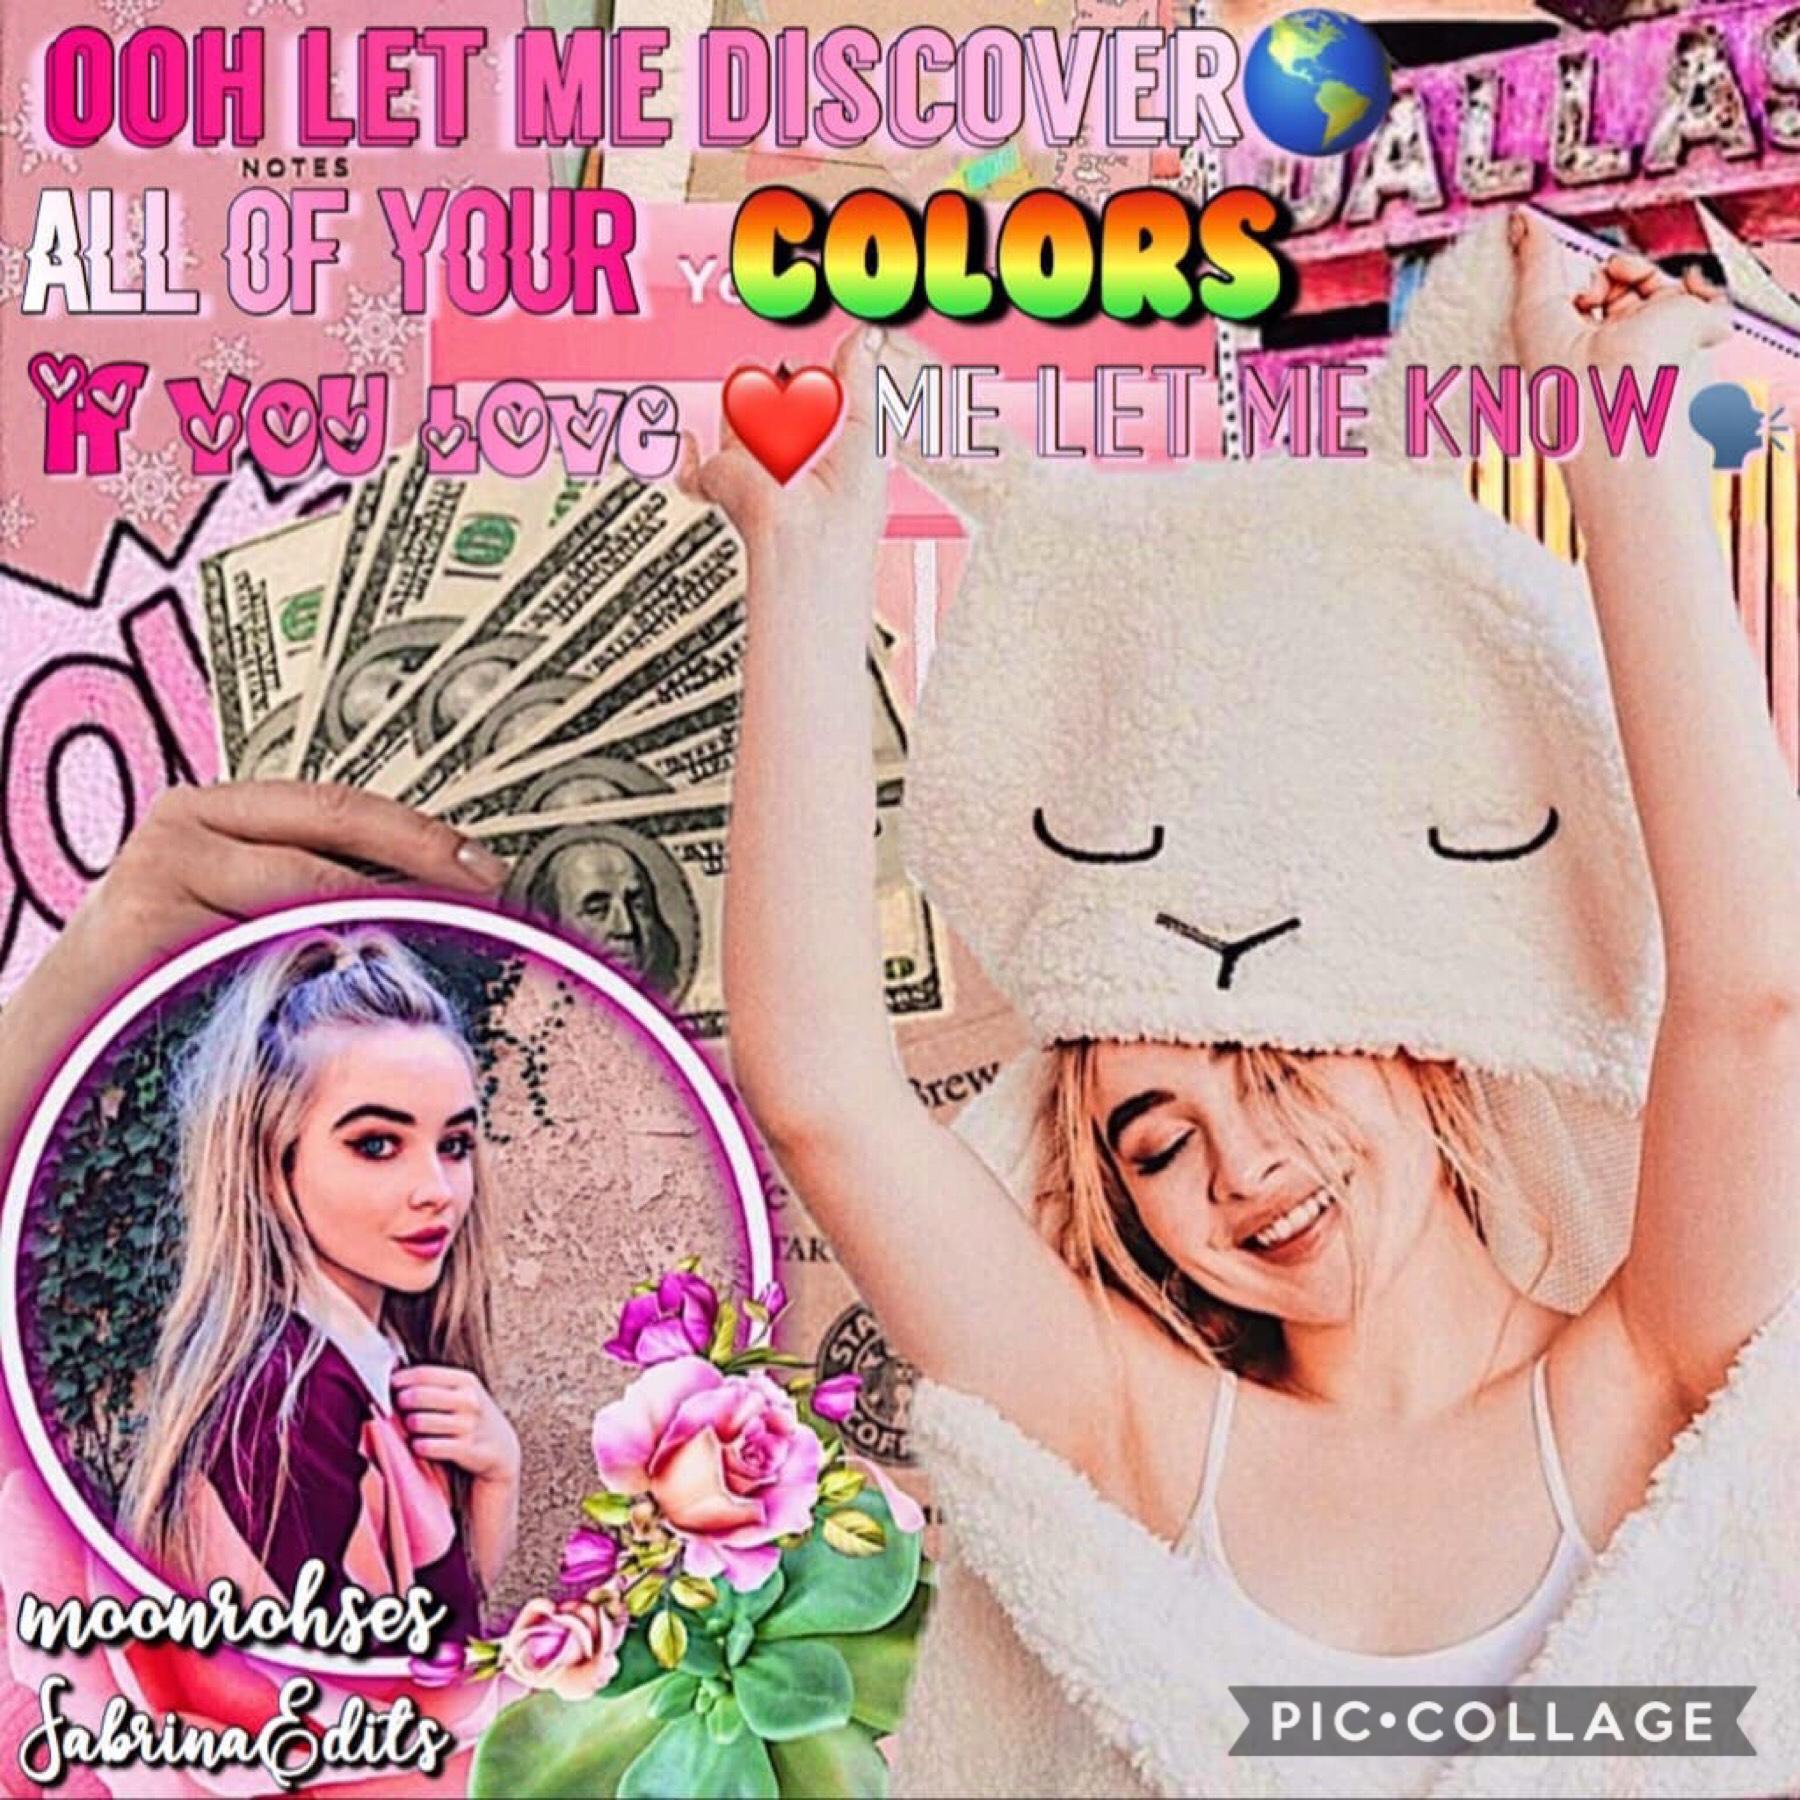 💗 t a p 💗

Collab with the wonderful @SabrinaEdits!! She did the amazing text and I did the background. Remember to go follow her and like all her gorgeous collages💖